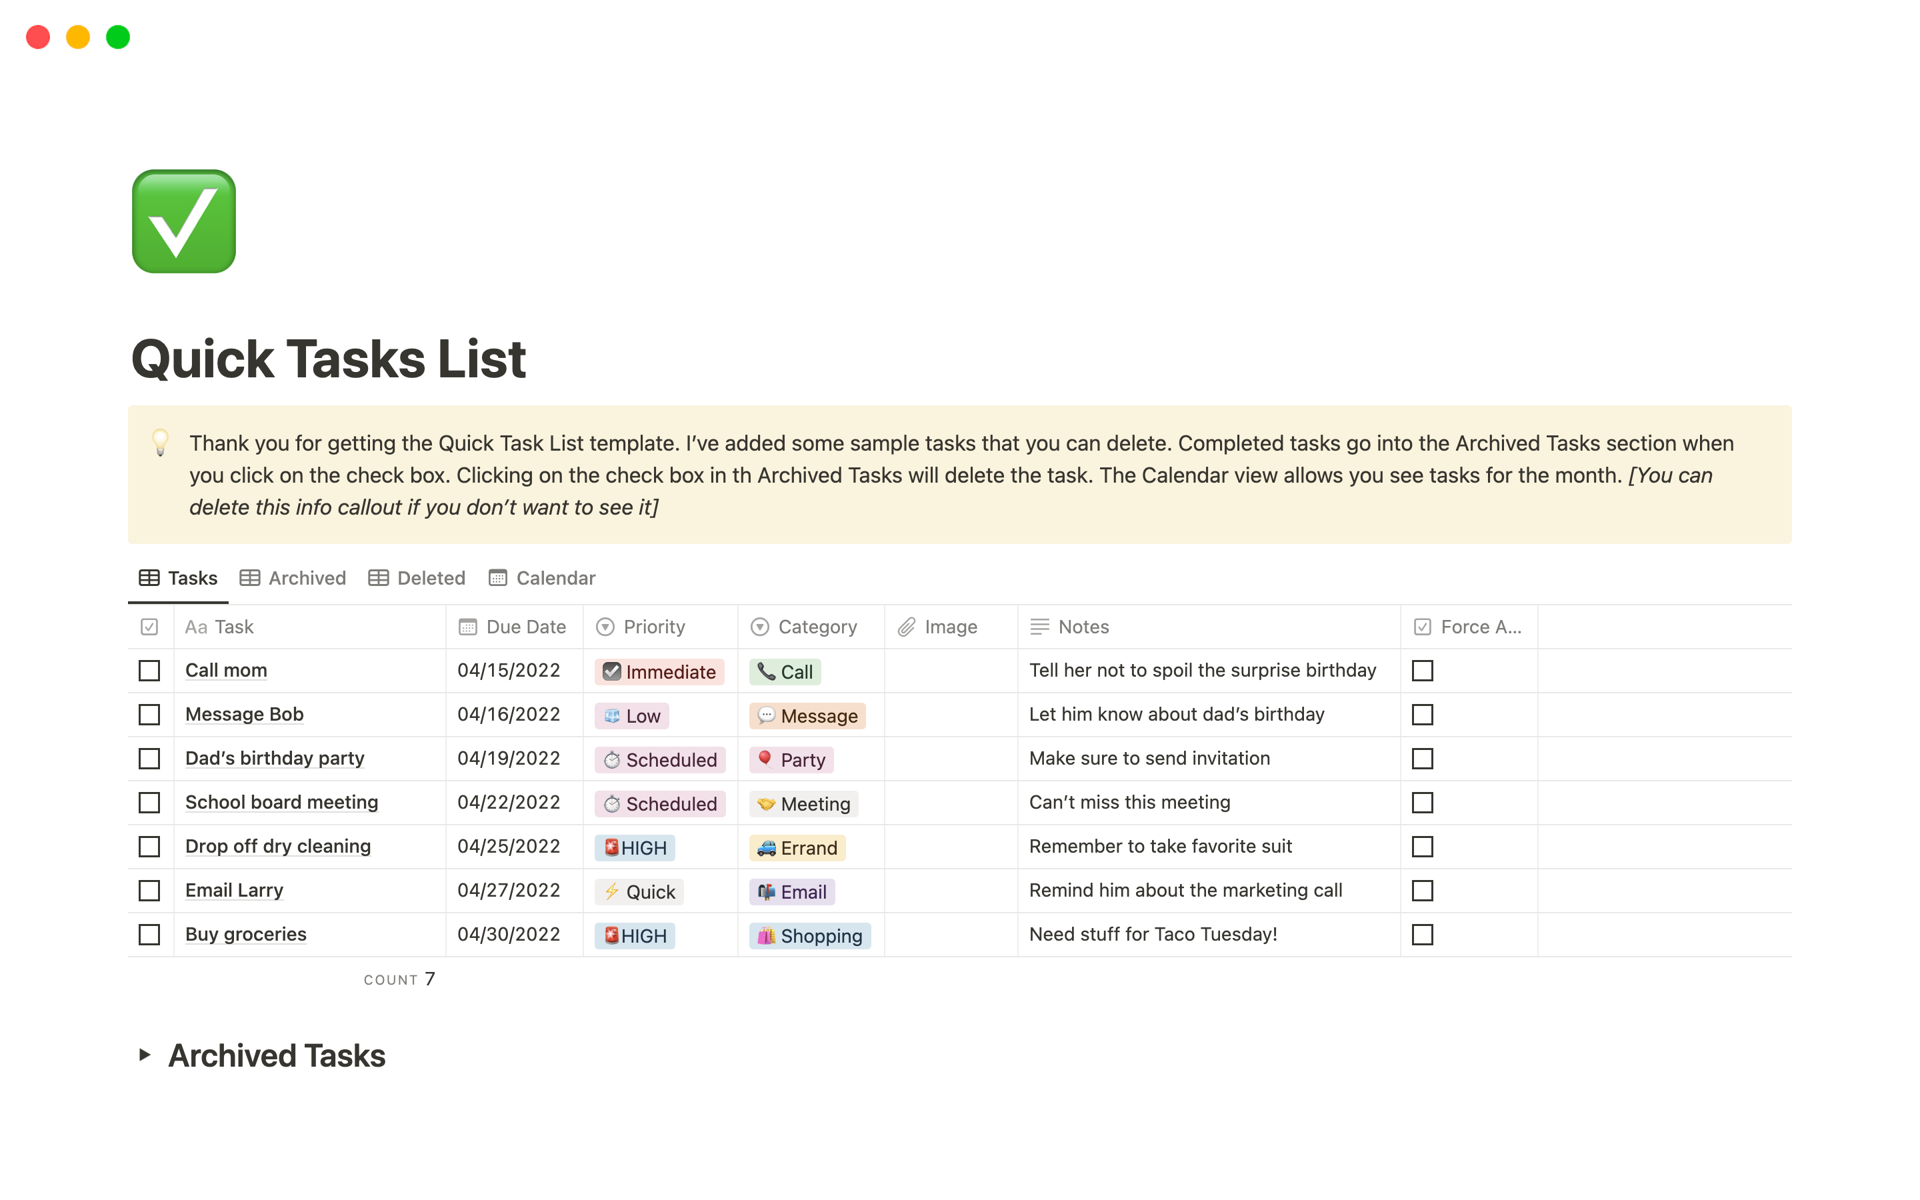 Quick Tasks List is a very simple but useful Notion template to manage your daily task list so you can stop procrastinating and boost your productivity to get things done.